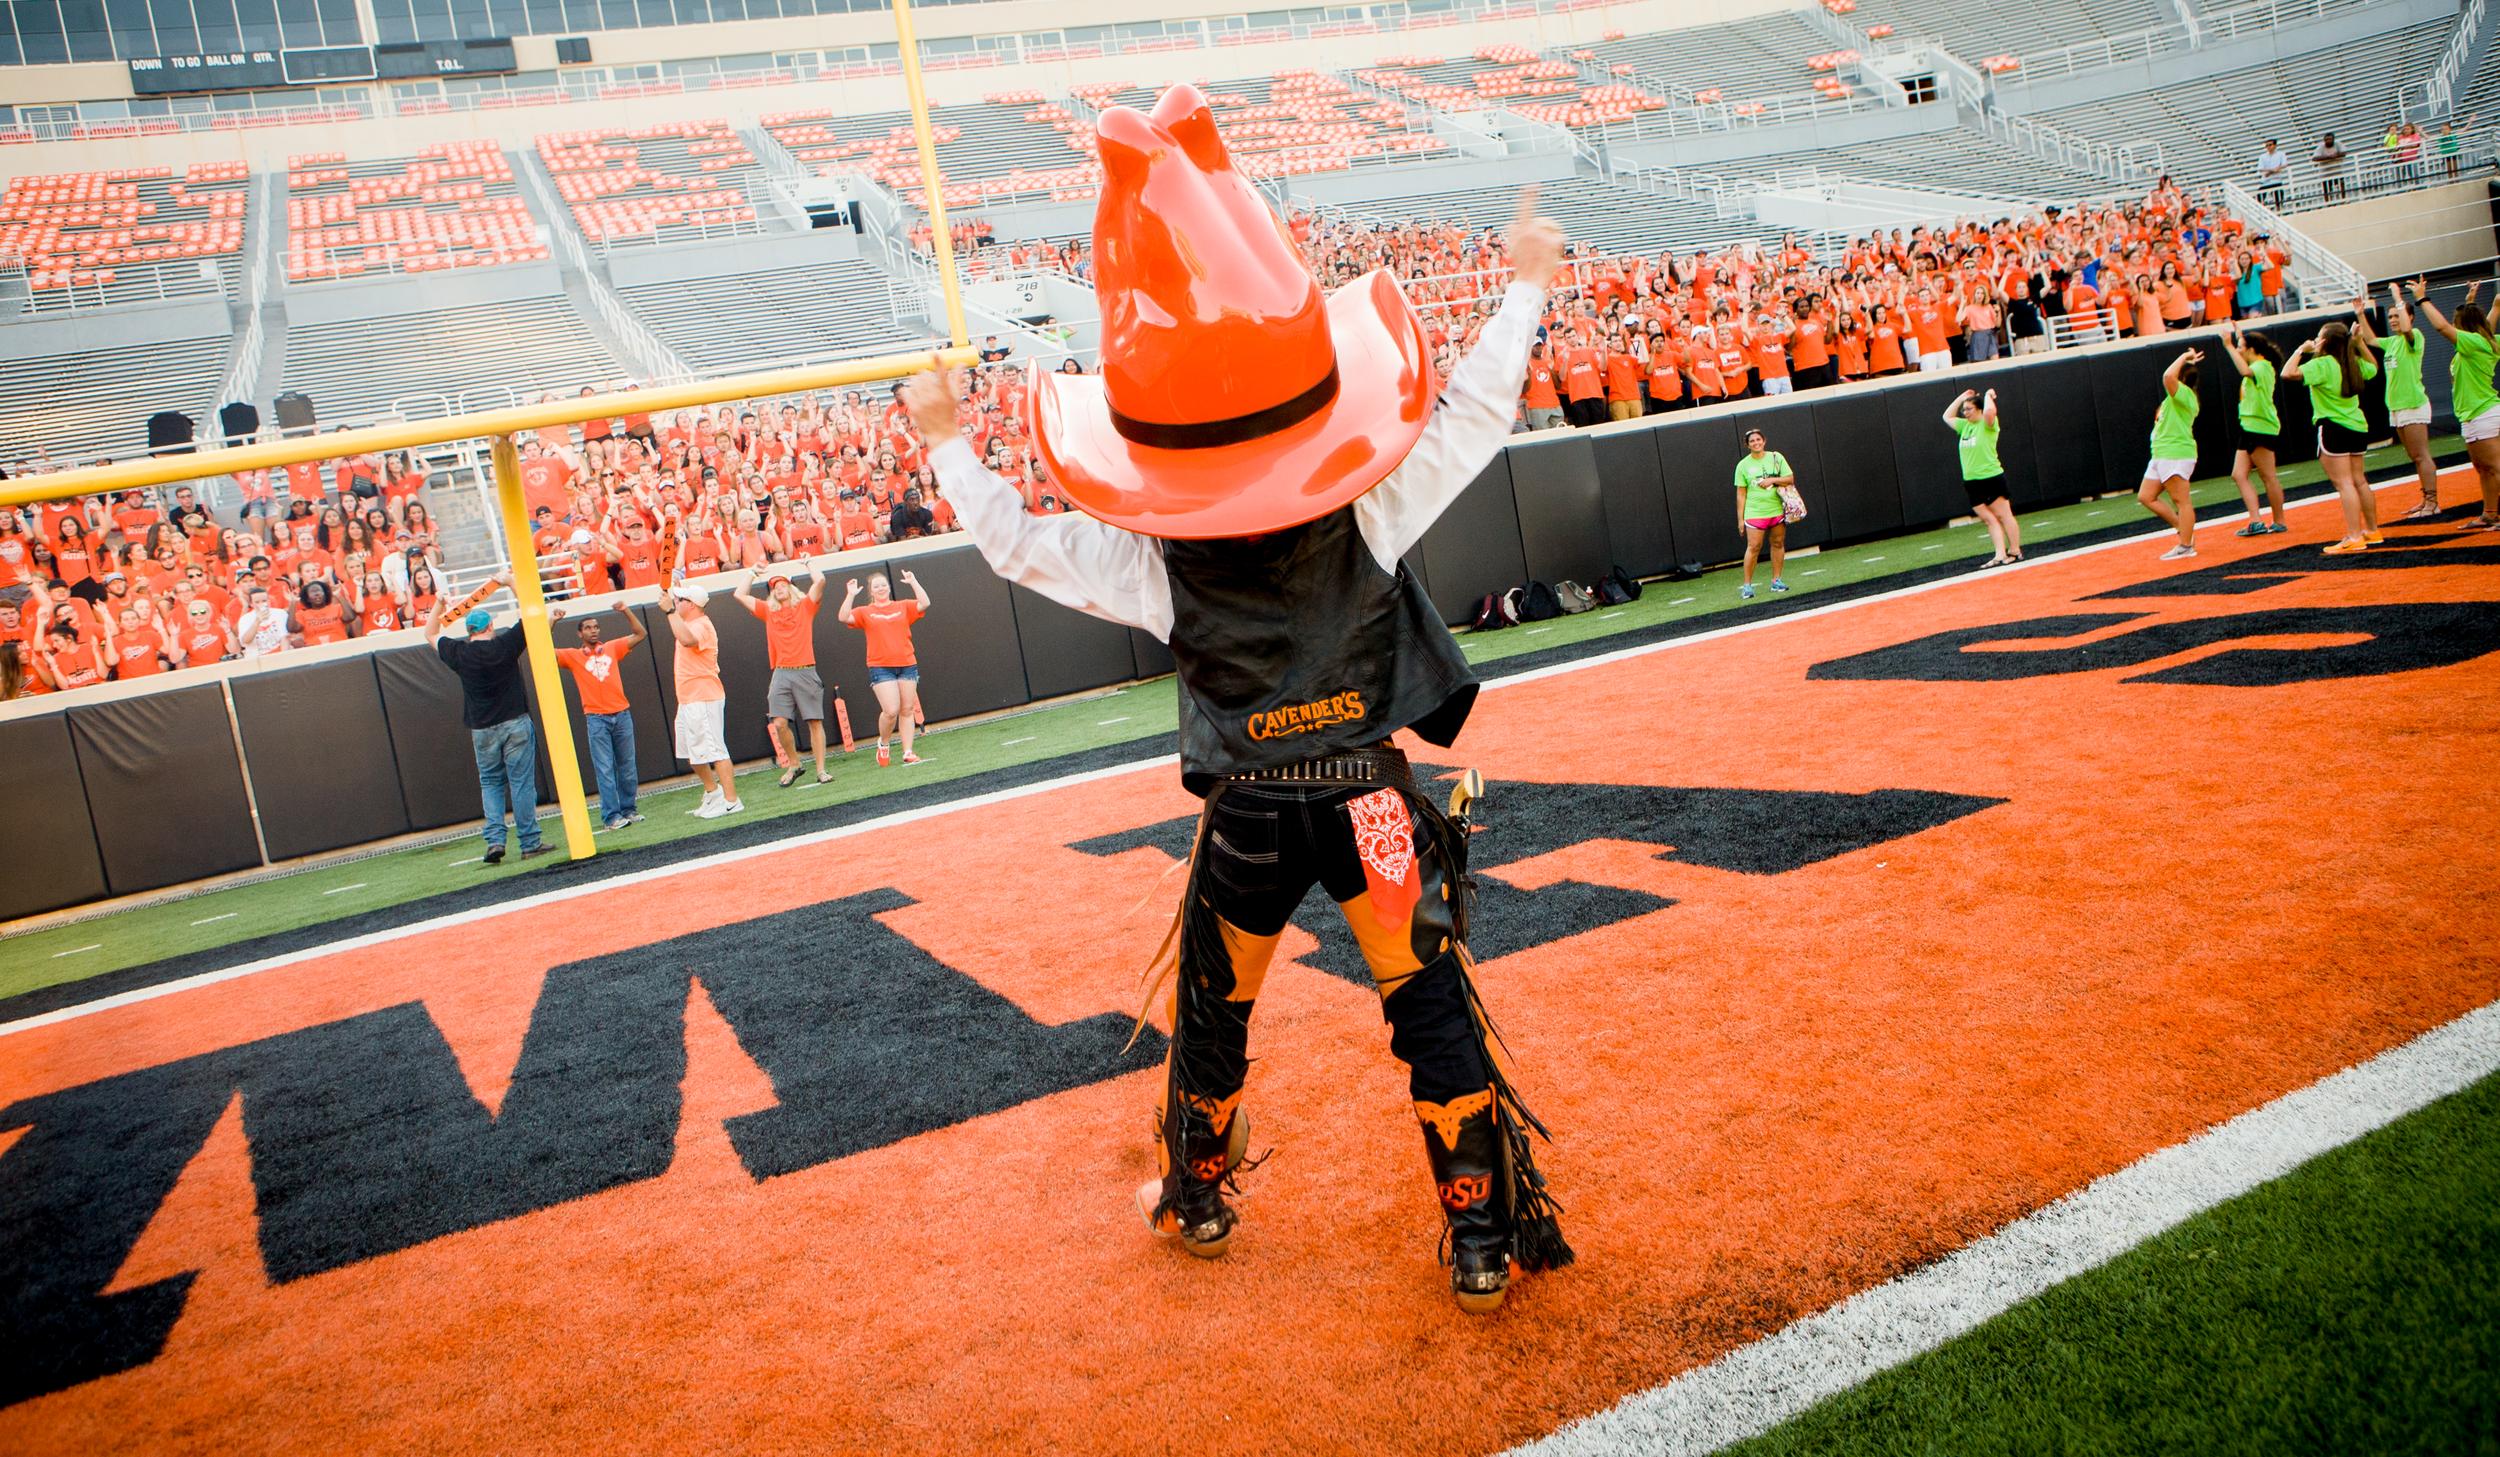 Pistol Pete interacting with an OSU crowd in the football stadium.